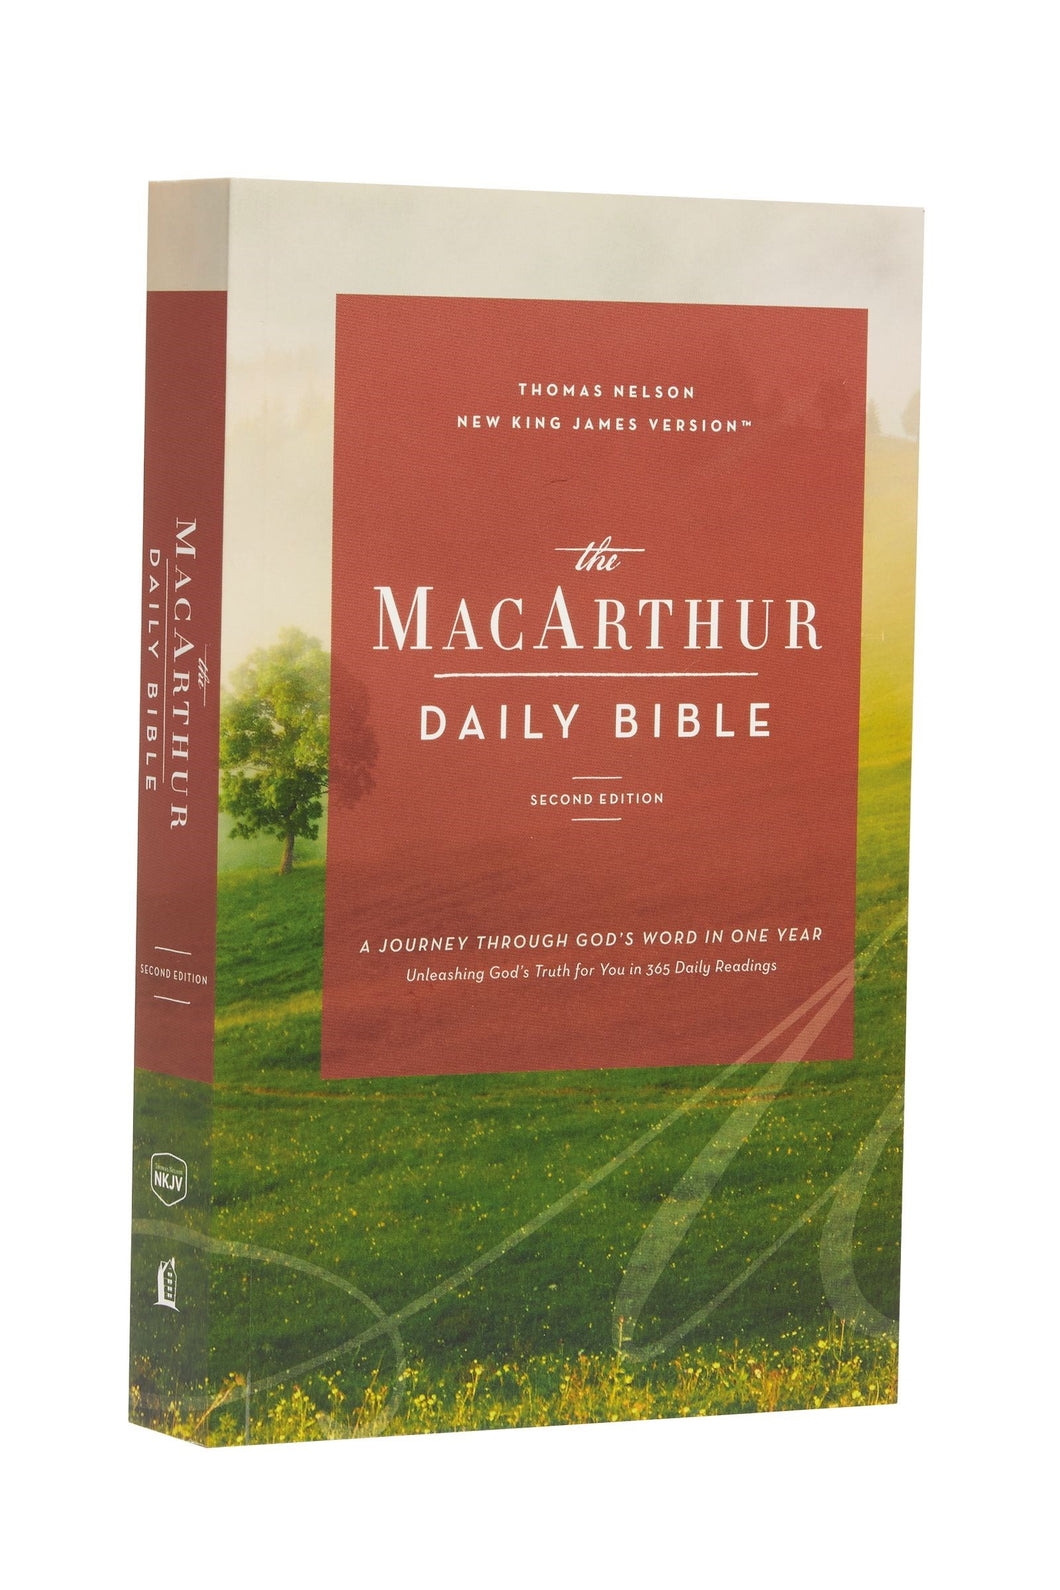 NKJV The MacArthur Daily Bible (2nd Edition) (Comfort Print)-Softcover